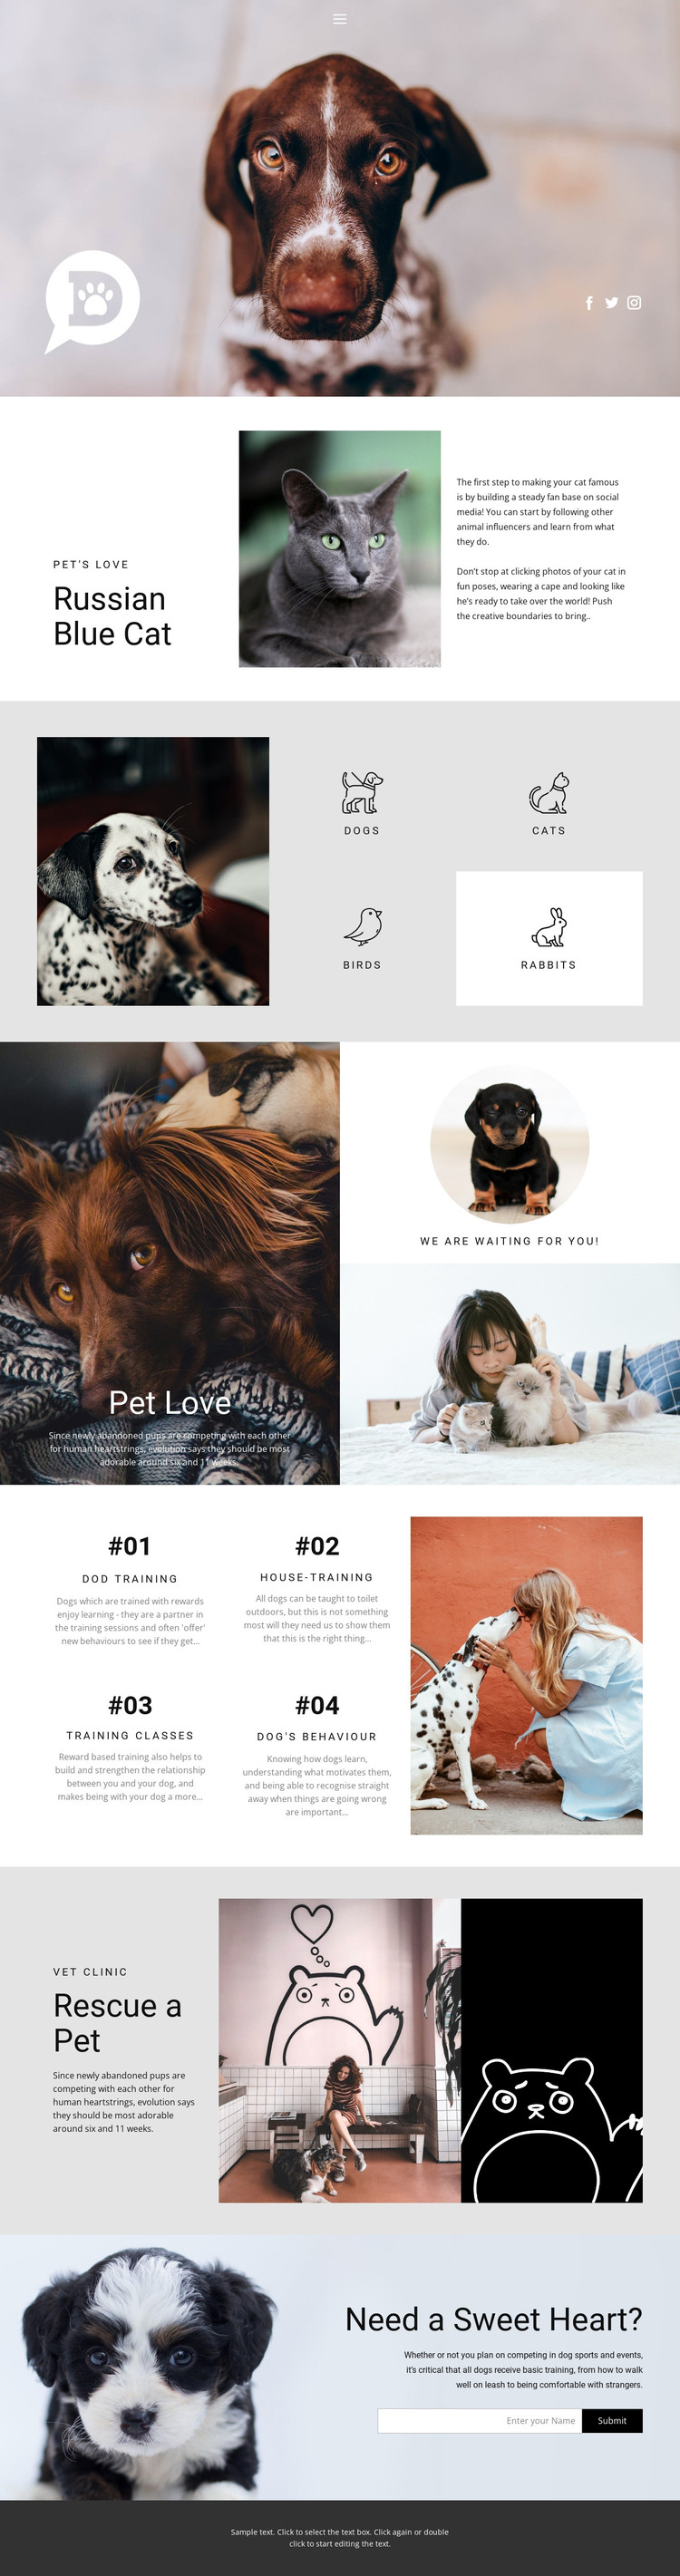 Care for pets and animals Web Design